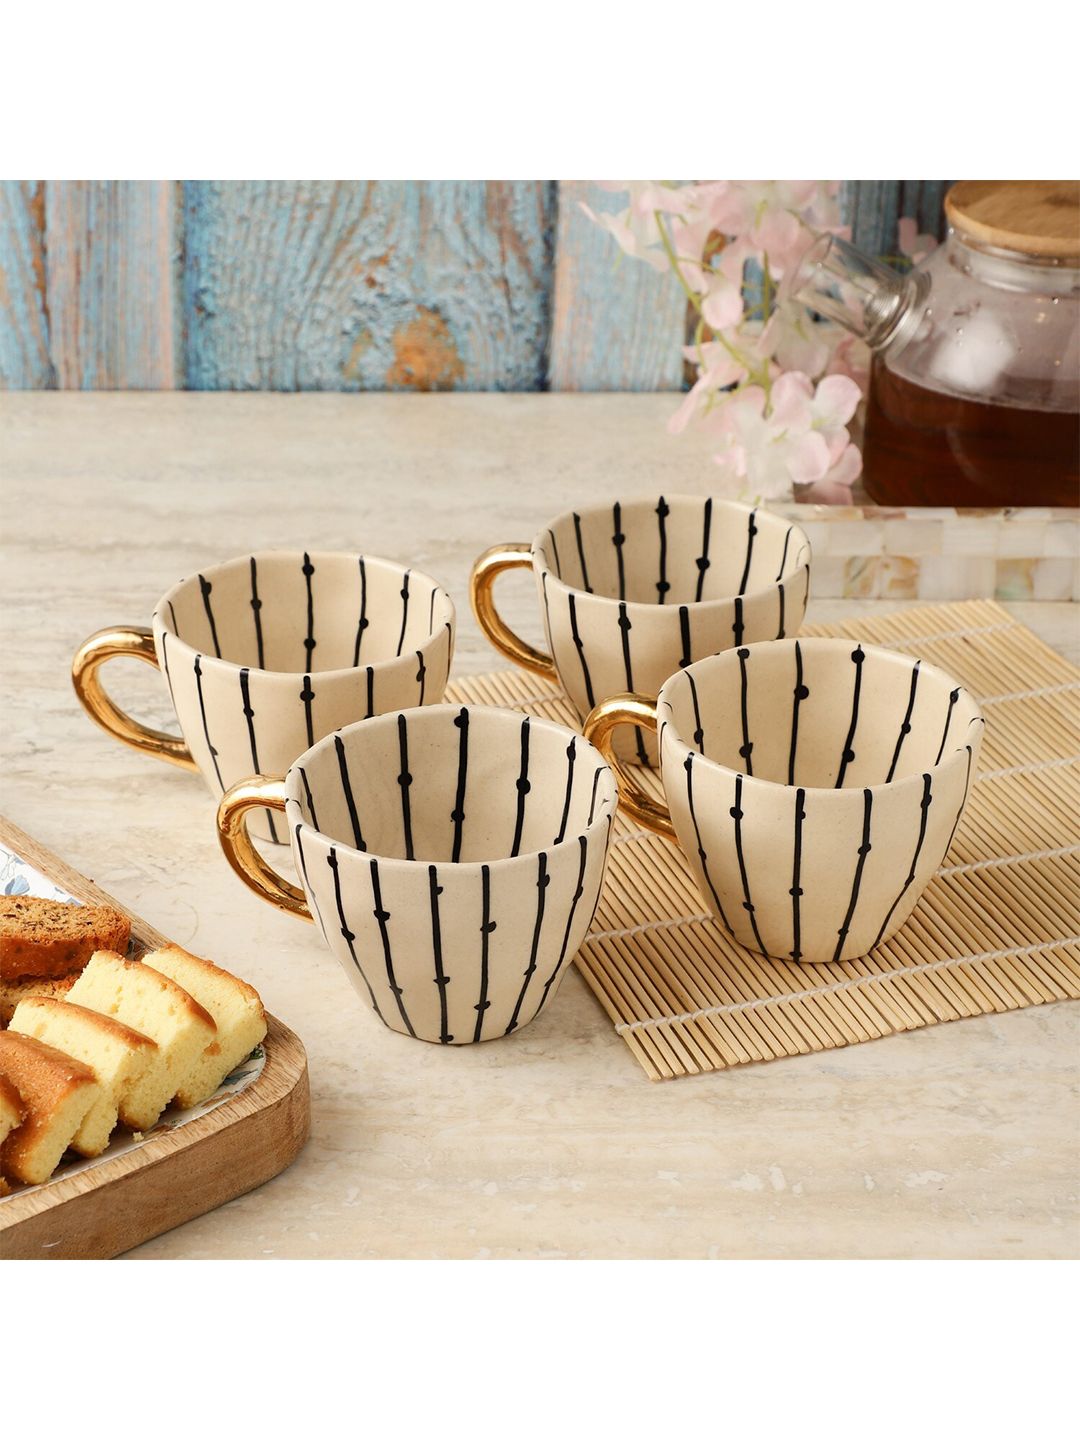 The Decor Mart Cream-Coloured & Black Printed Ceramic Glossy Mugs Set of Cups and Mugs Price in India